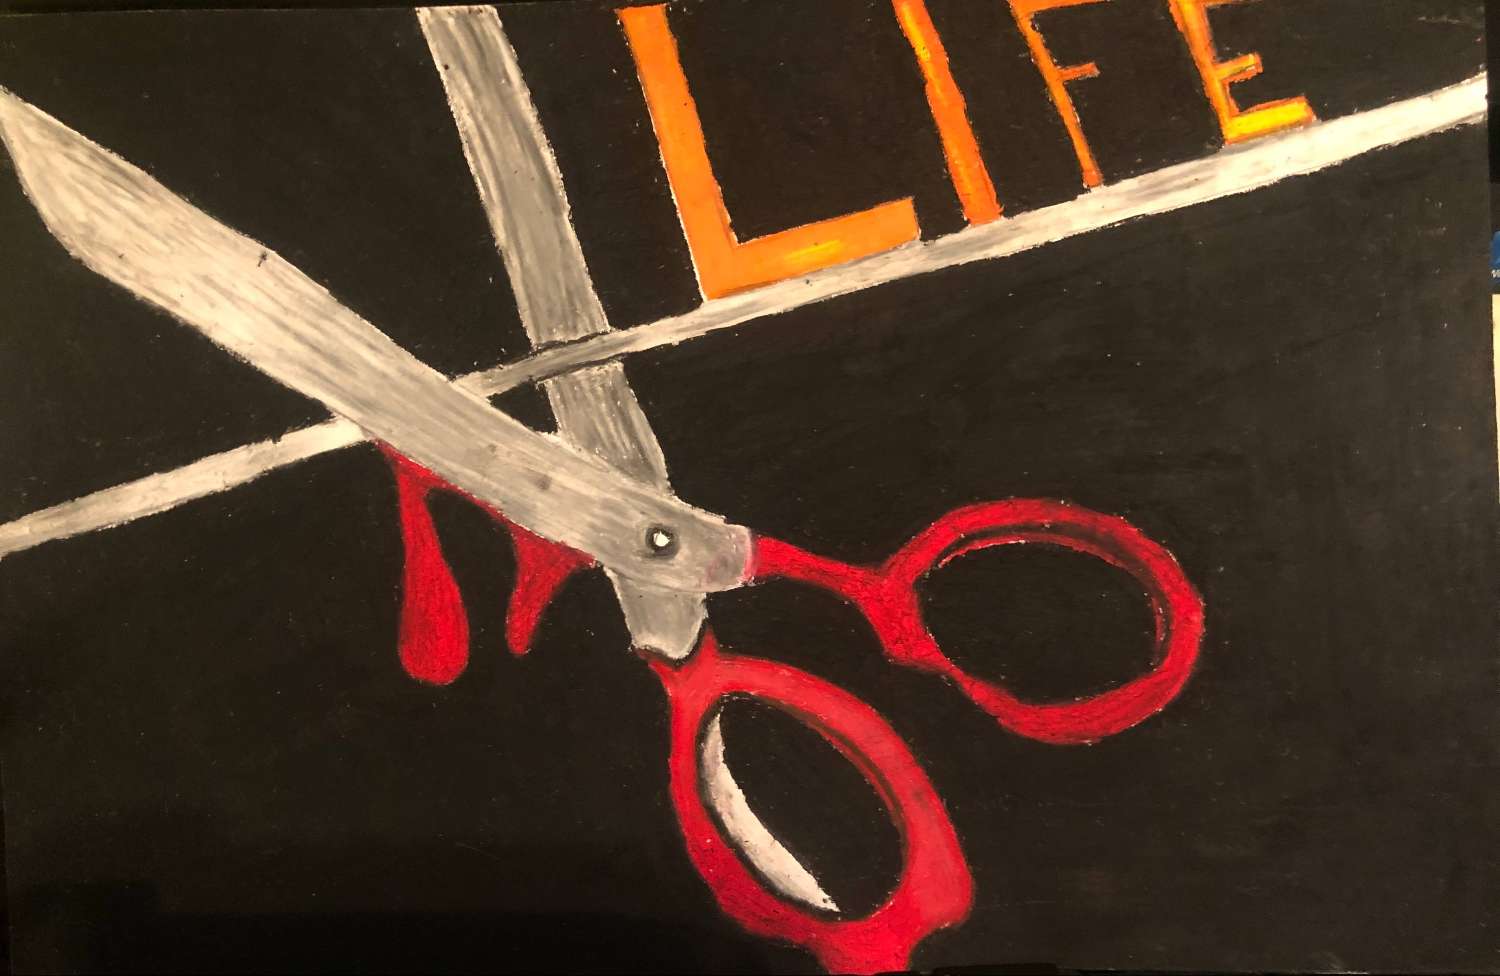 Kyteyana Cox - Middle College High School
Honorable Mention High School

I was inspired to create this piece as I thought of “cutting life by a thread”. This is what happens when one surrounds themselves by violence. 